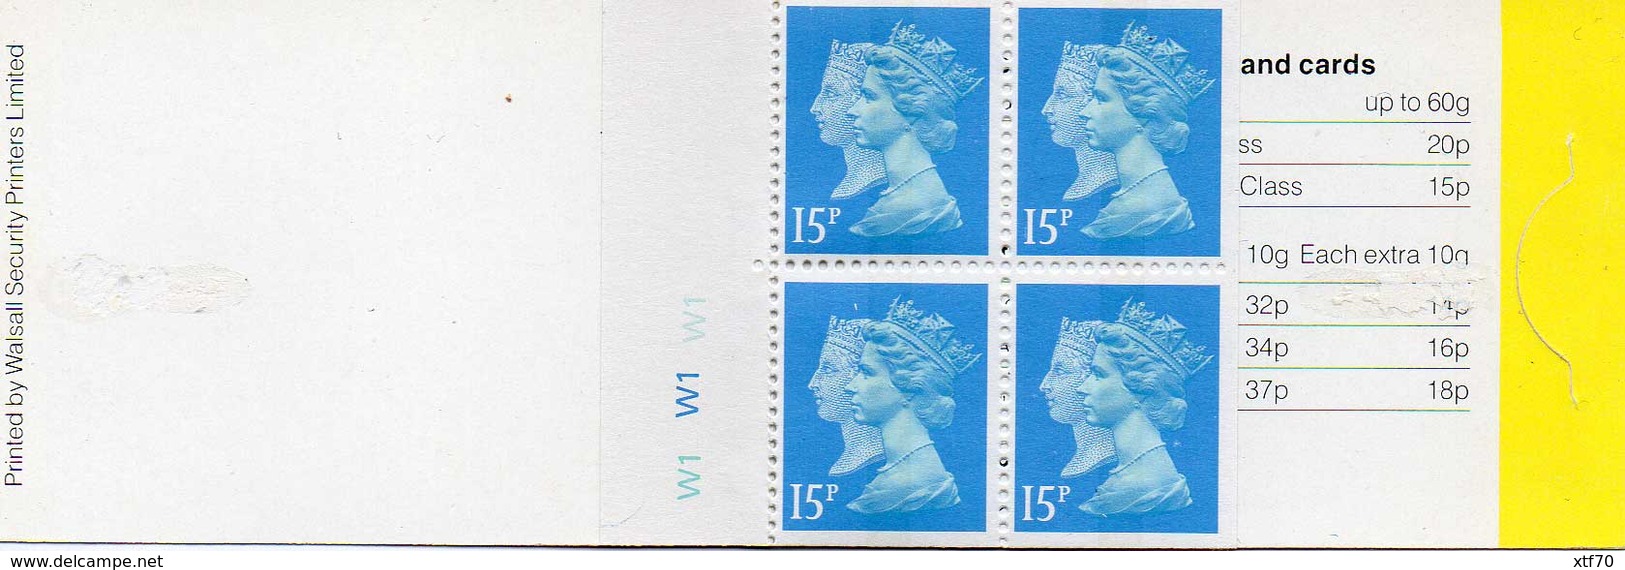 GREAT BRITAIN 1990 60p Penny Black Anniversary Booklet JA1 Cyl - Carnets